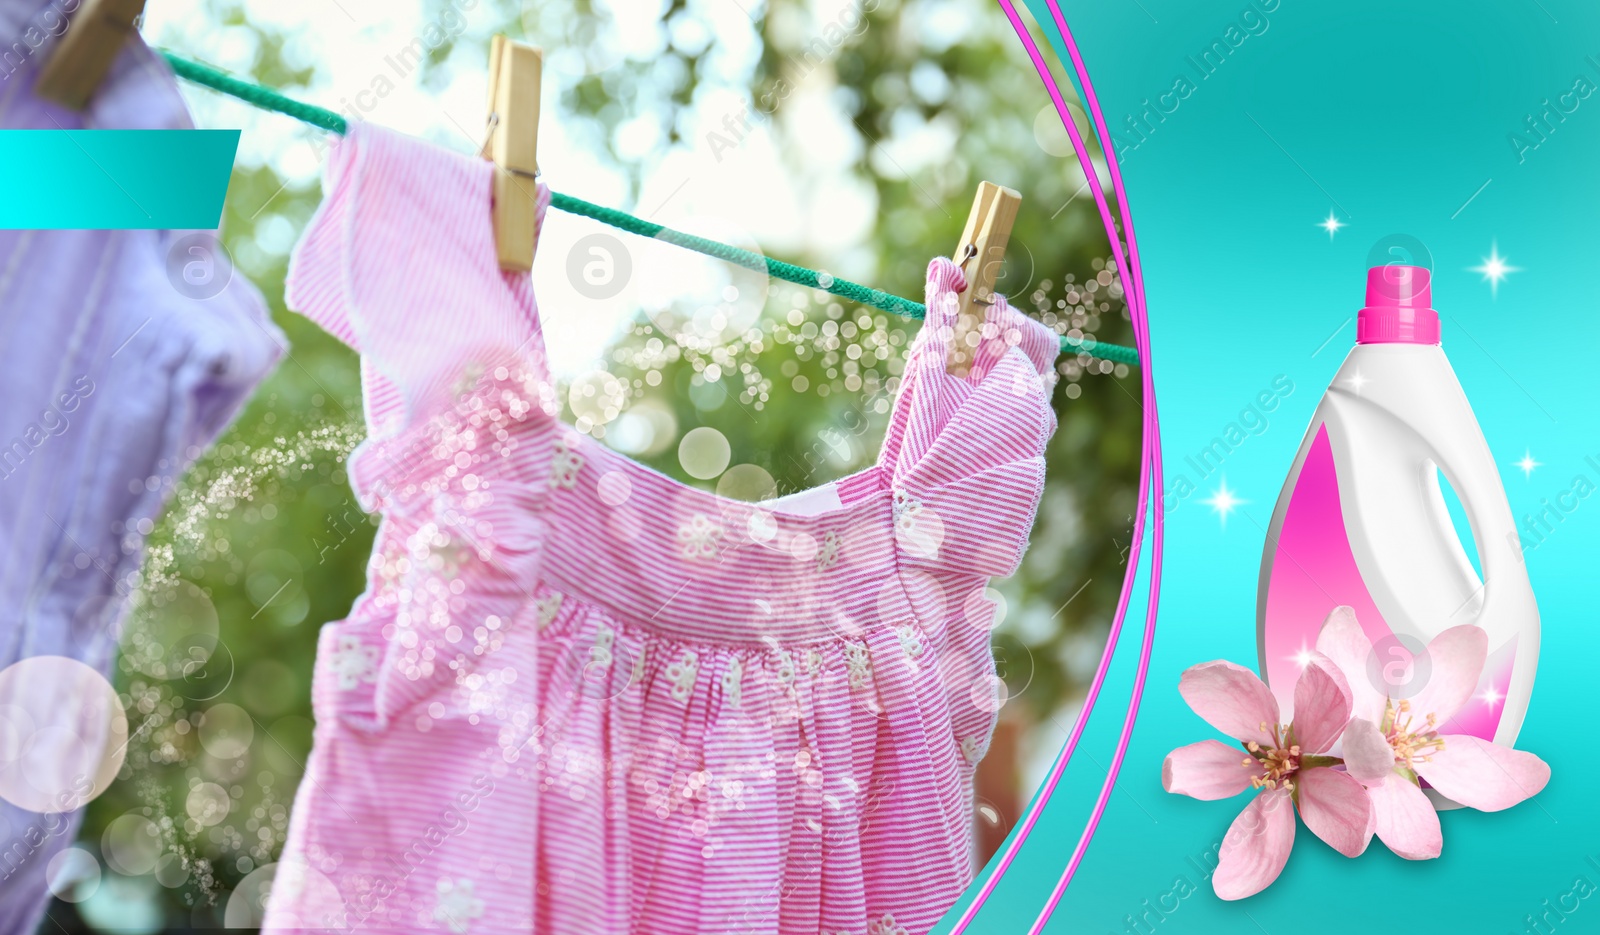 Image of Fabric softener advertising design. Bottle of conditioner and cherry blossom flowers. Laundry drying on rope outdoors